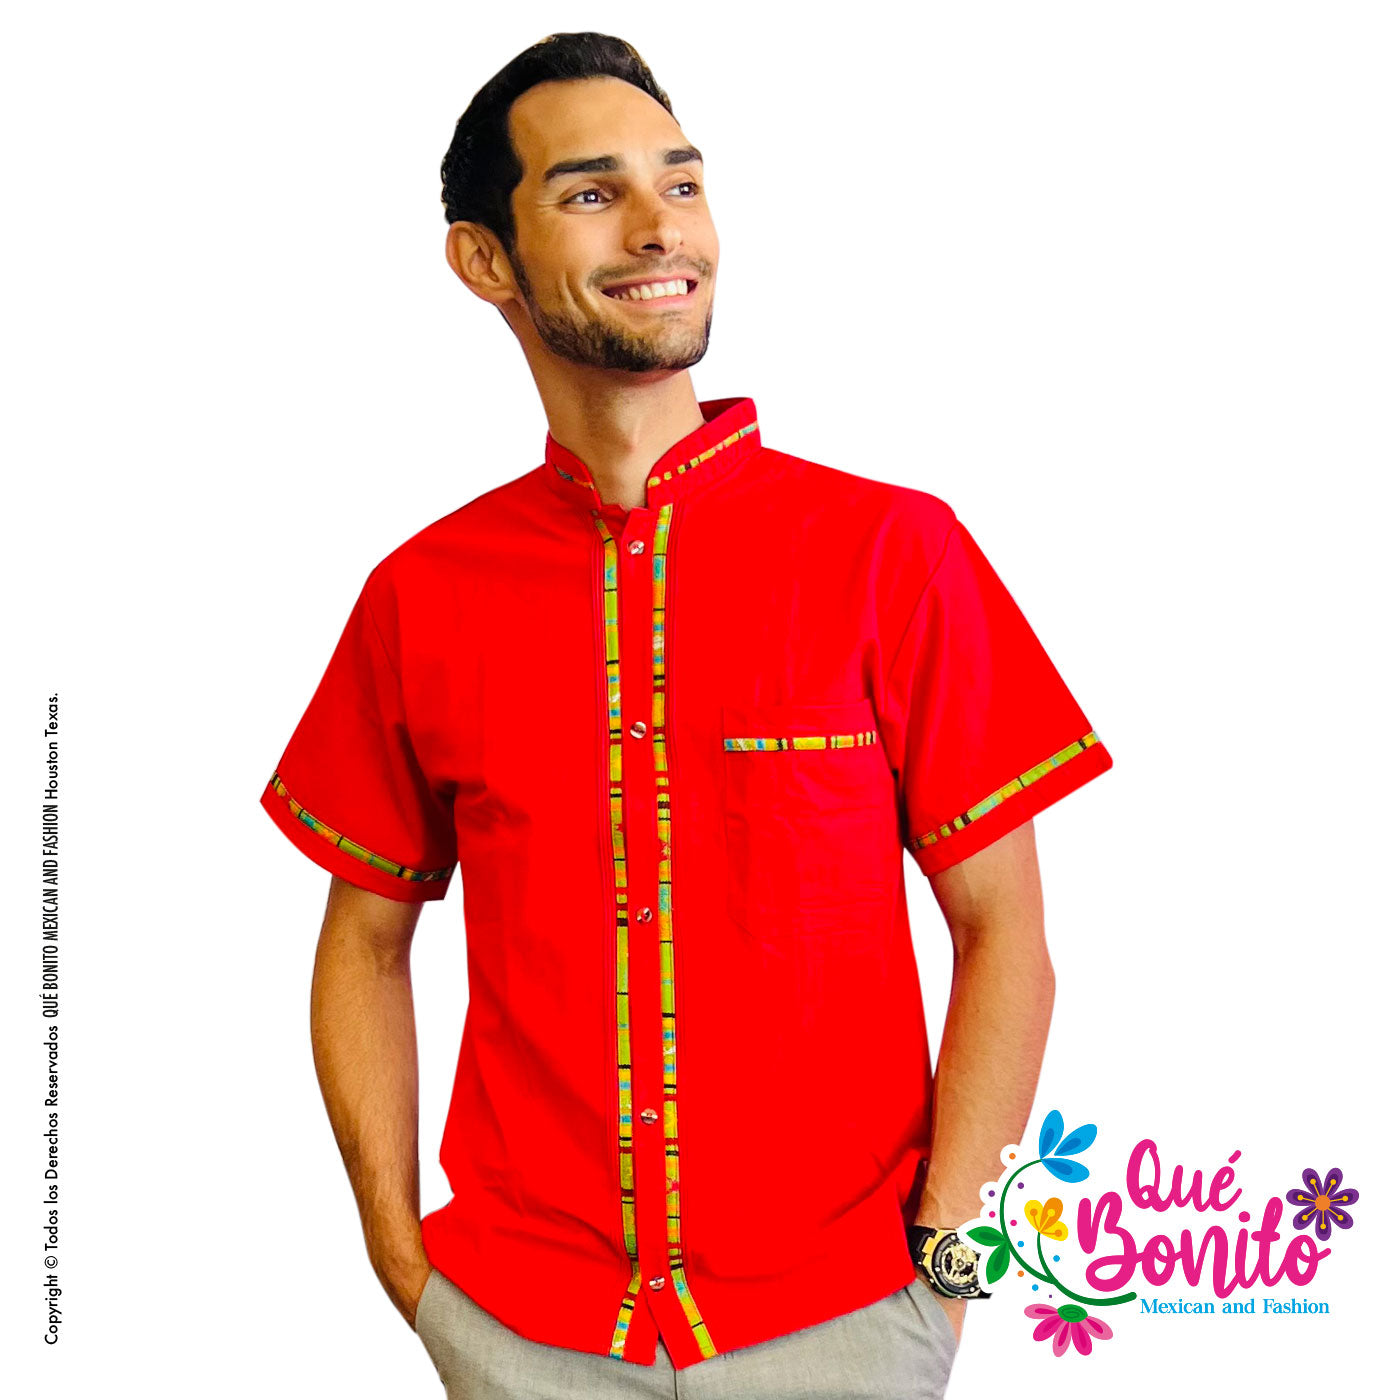 Red Mexican shirt Que Bonito Mexican and Fashion